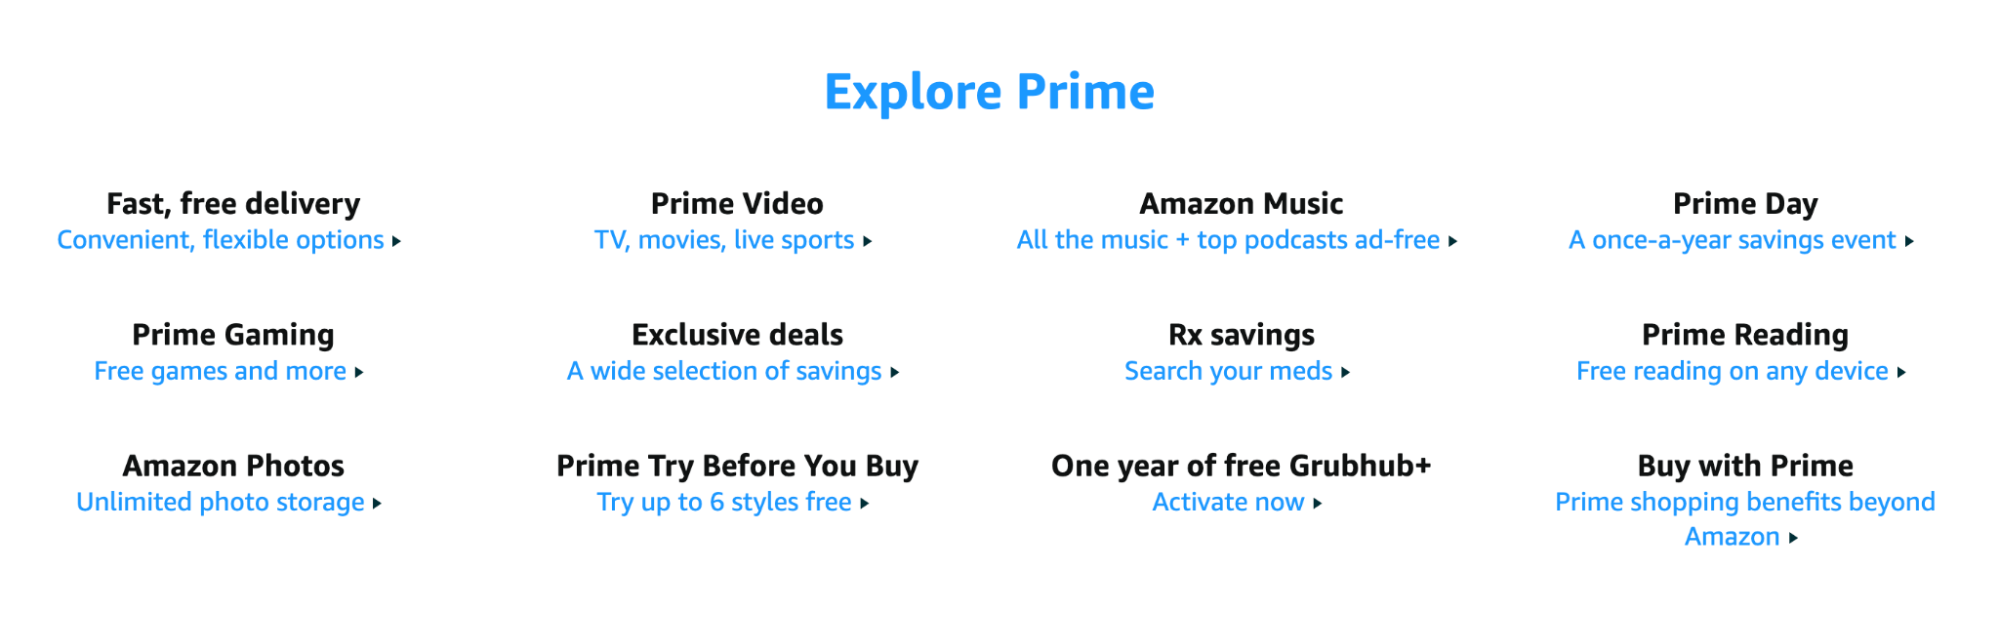 A screenshot from Amazon Prime’s website showing its associated products and services: fast, free delivery, Prime Video, Amazon Music, Prime Day, Prime Gaming, Exclusive deals, Rx Savings, Prime Reading, Amazon Photos, Prime Try Before You Buy, One year of free Grubhub+, and Buy with Prime. 